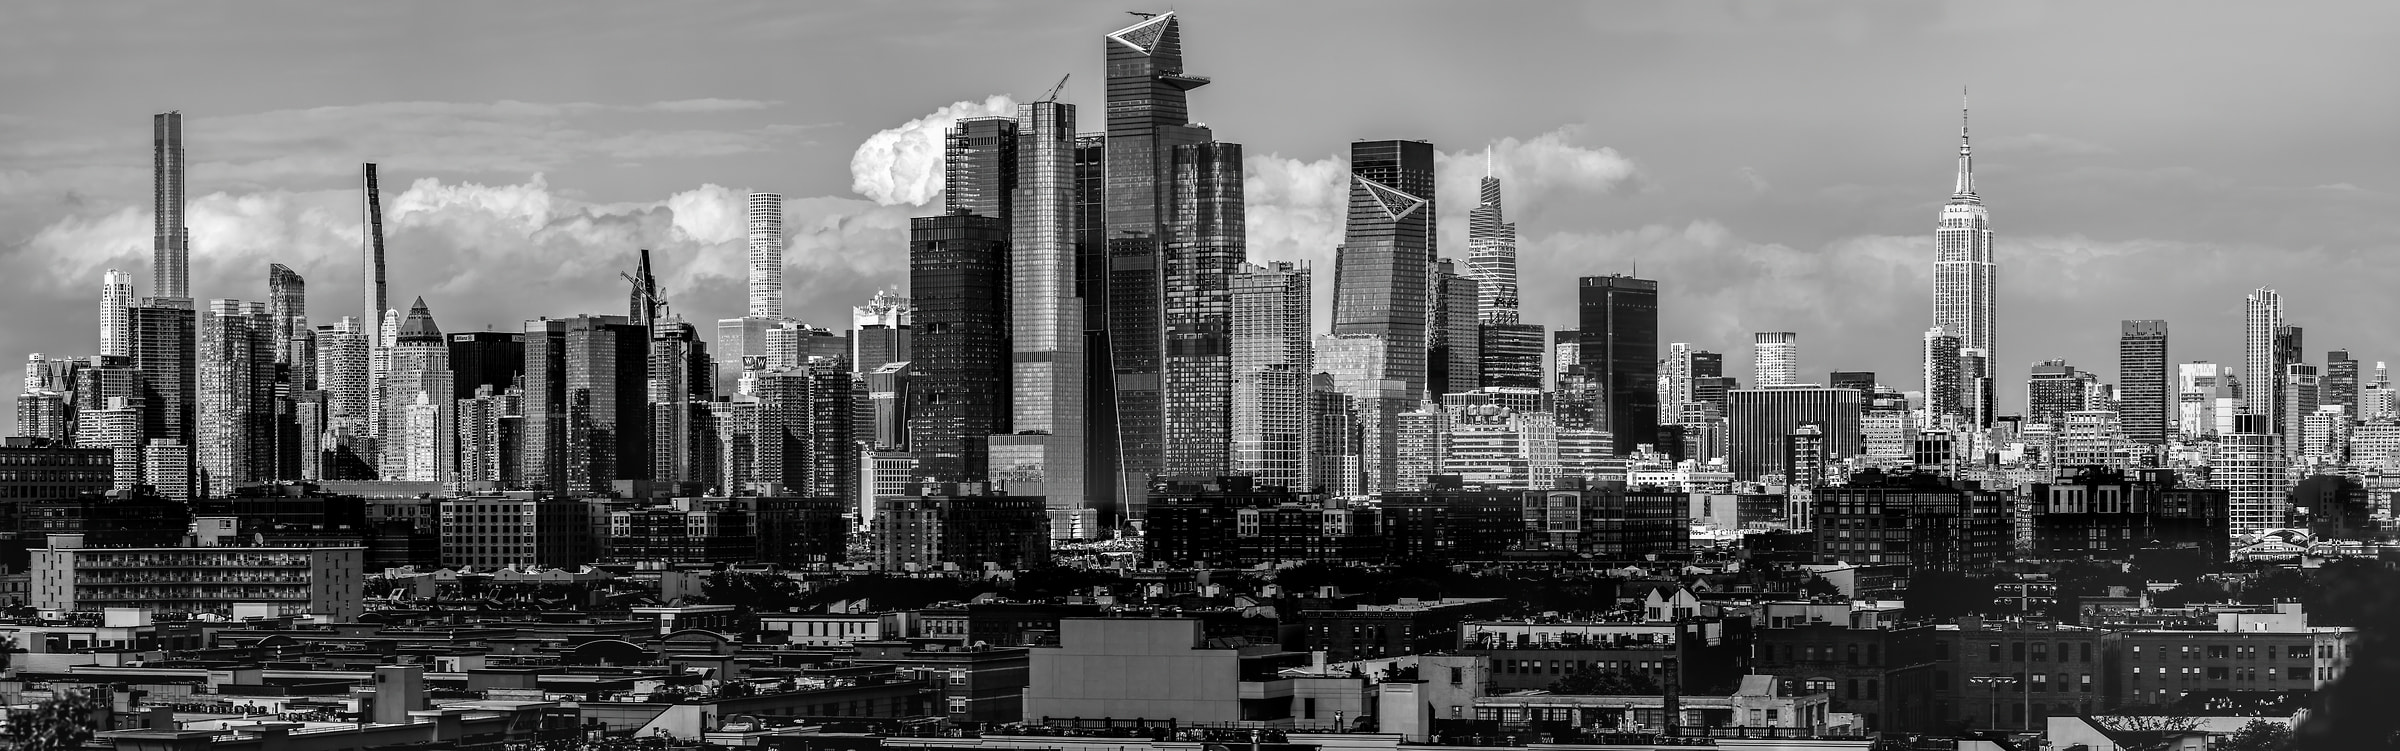 273 megapixels! A very high resolution, large-format black & white photo of Hudson Yards in New York City; skyline photograph created by Beyti Barbaros in Jersey City, New Jersey